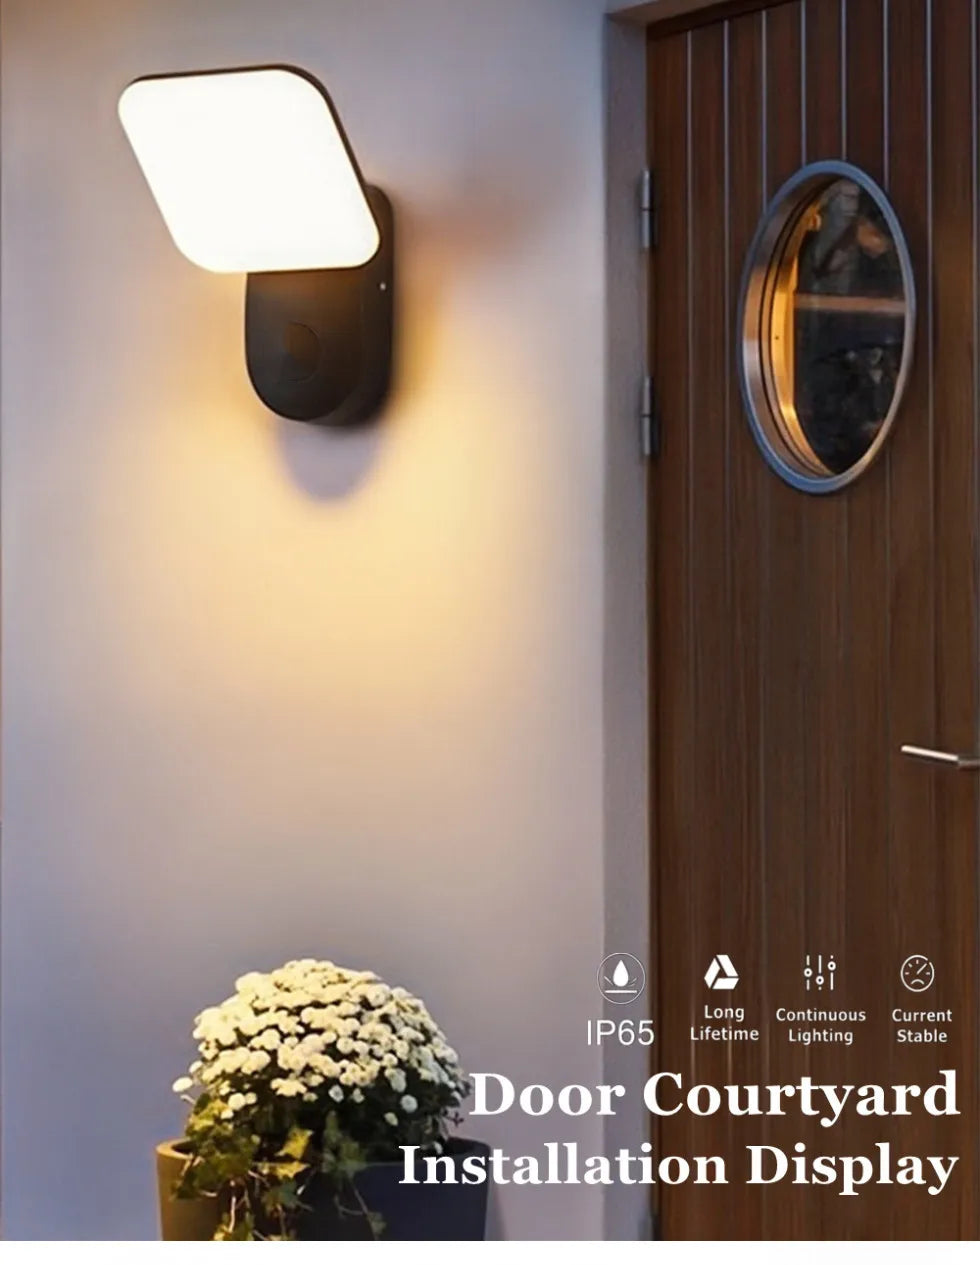 LED Wall Light, Durable outdoor lighting with water resistance and simple installation for doorways, courtyards, and display spaces.